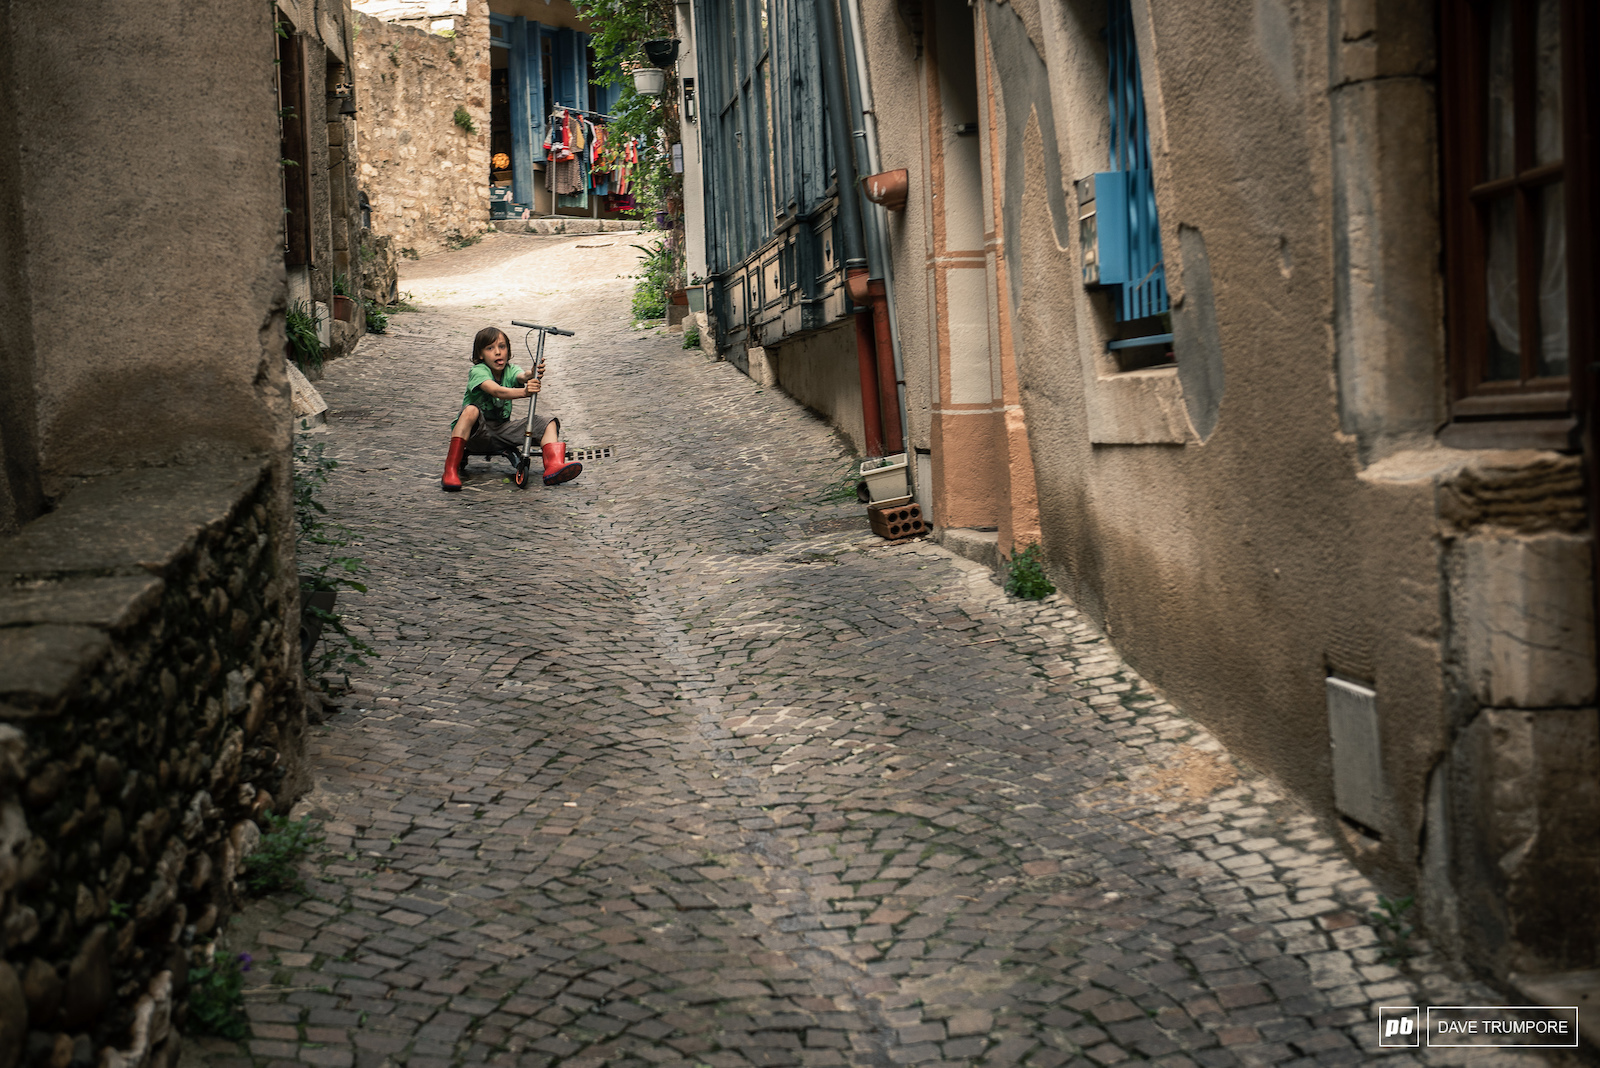 The locals are already out testing the fast lines for Stage 4 through the streets of Olargues.